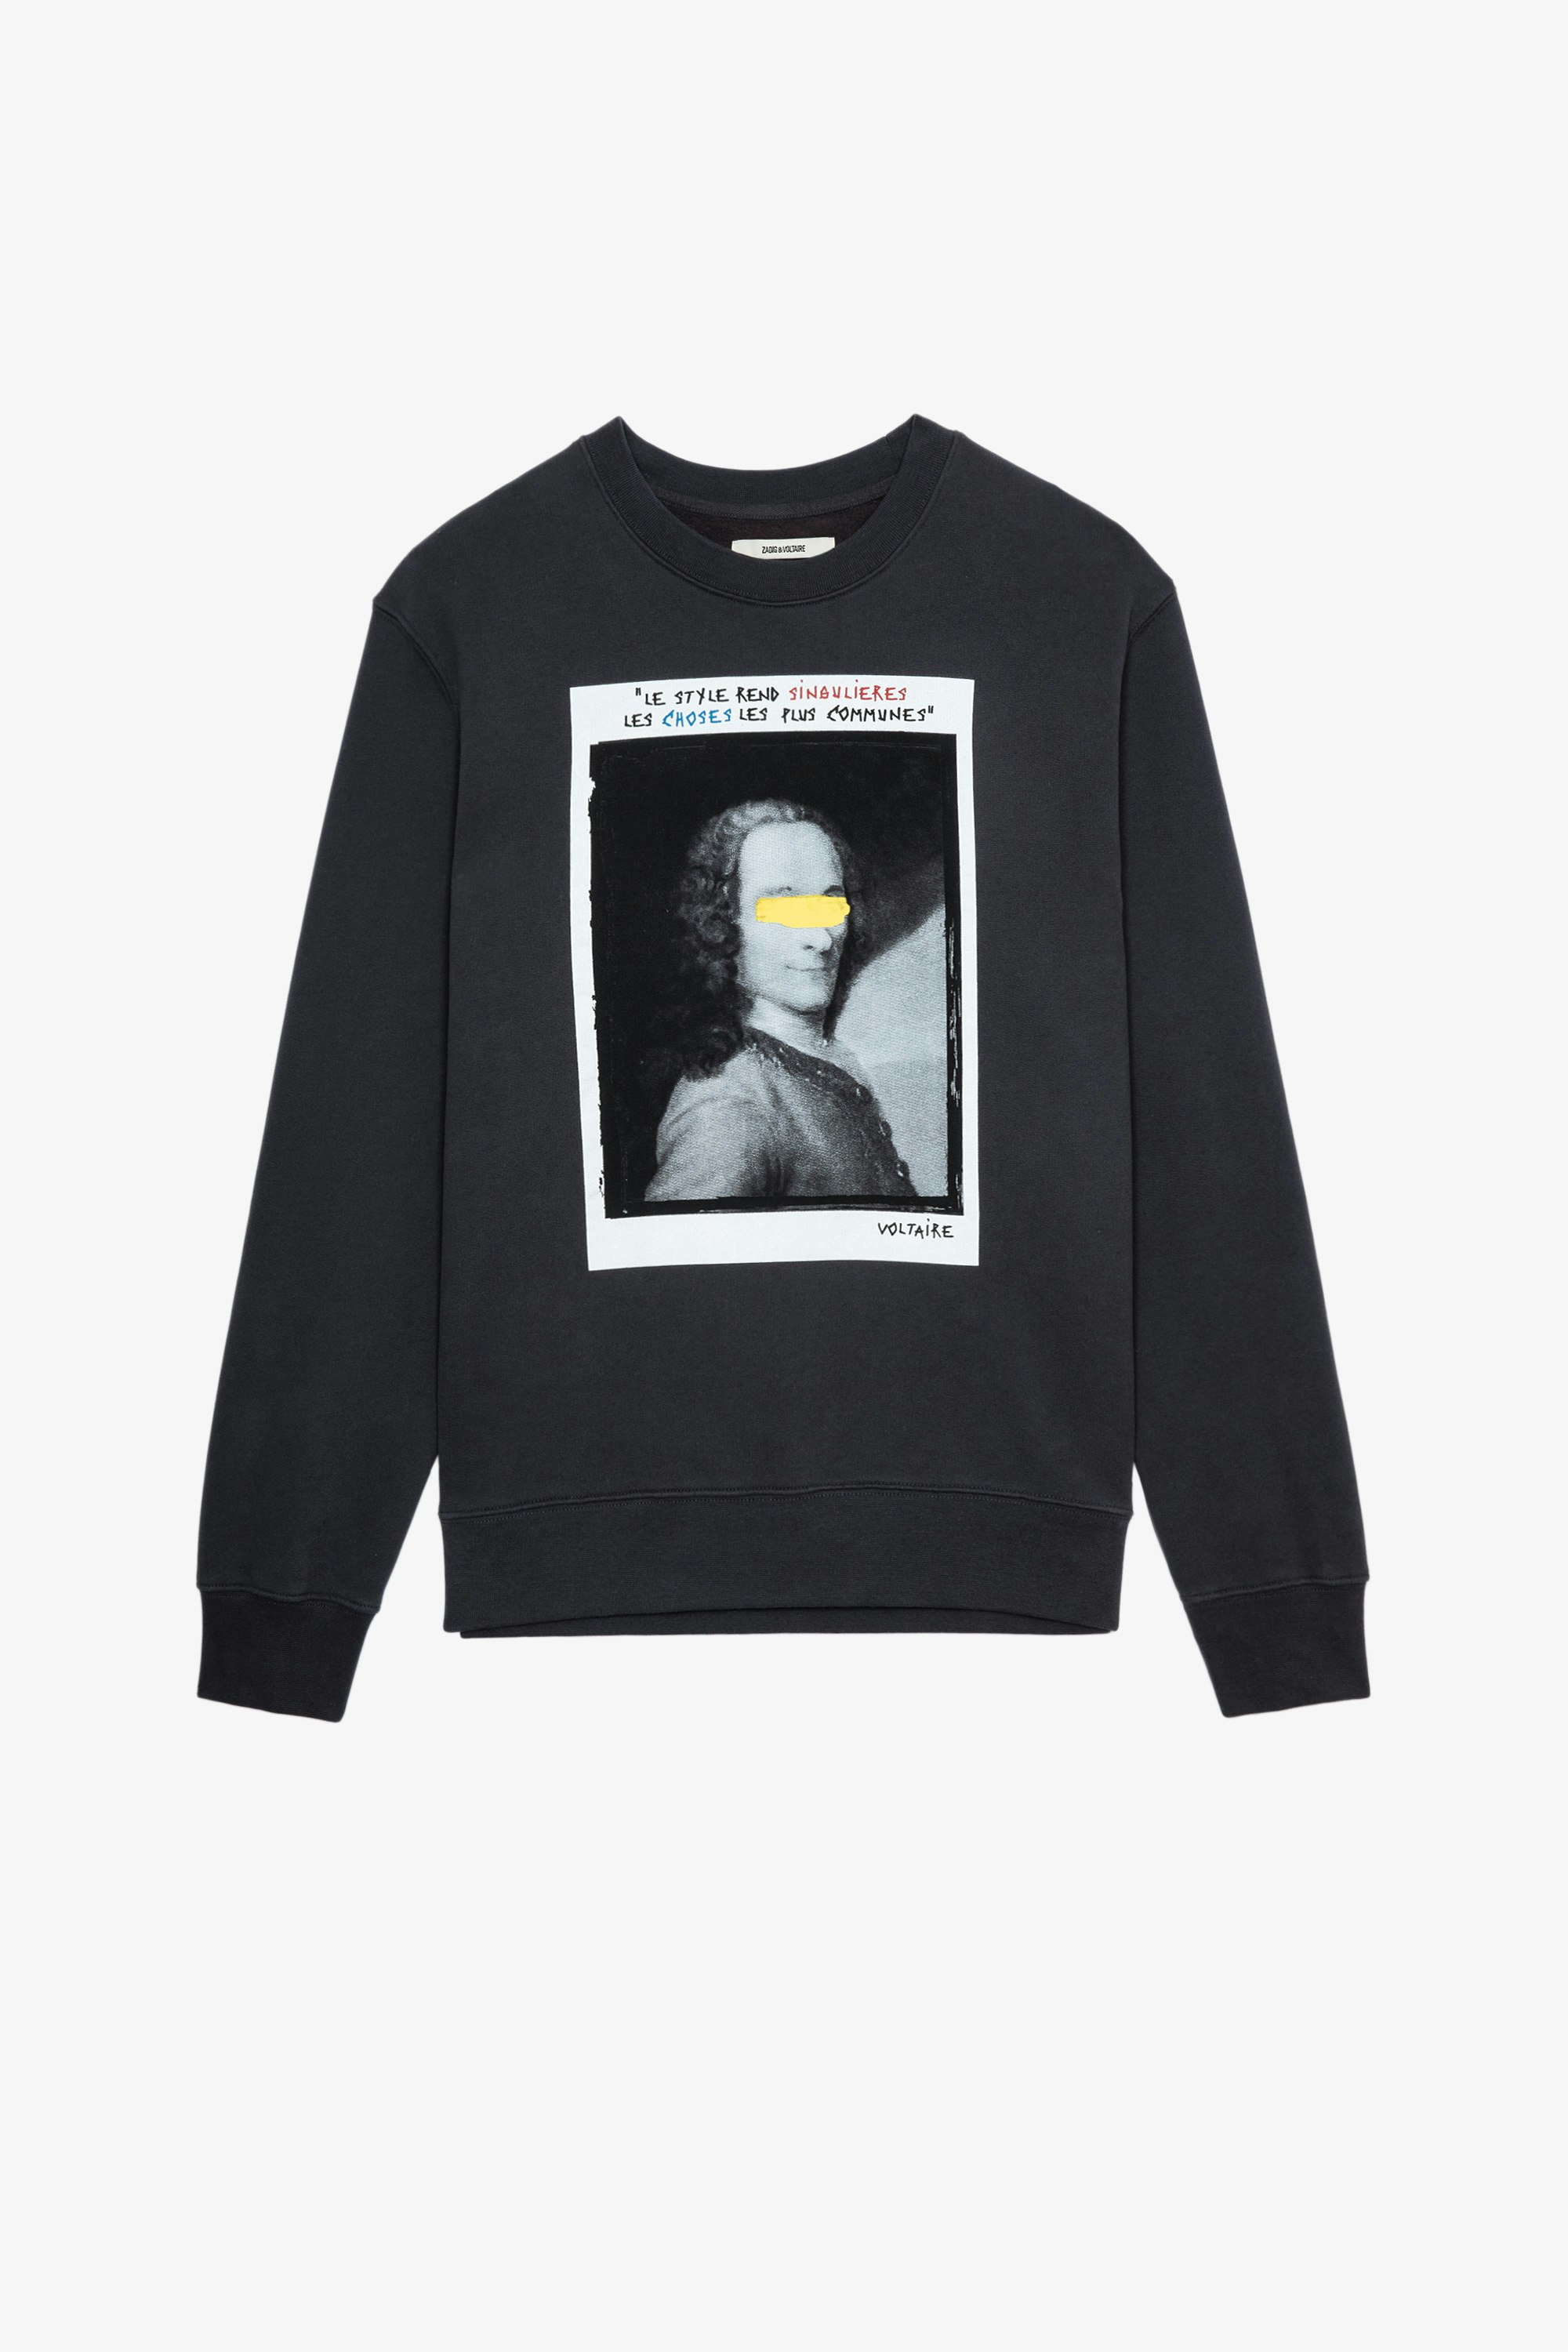 Voltaire フォトプリント Simba スウェット Men’s grey cotton sweatshirt with a photoprint on the front and back